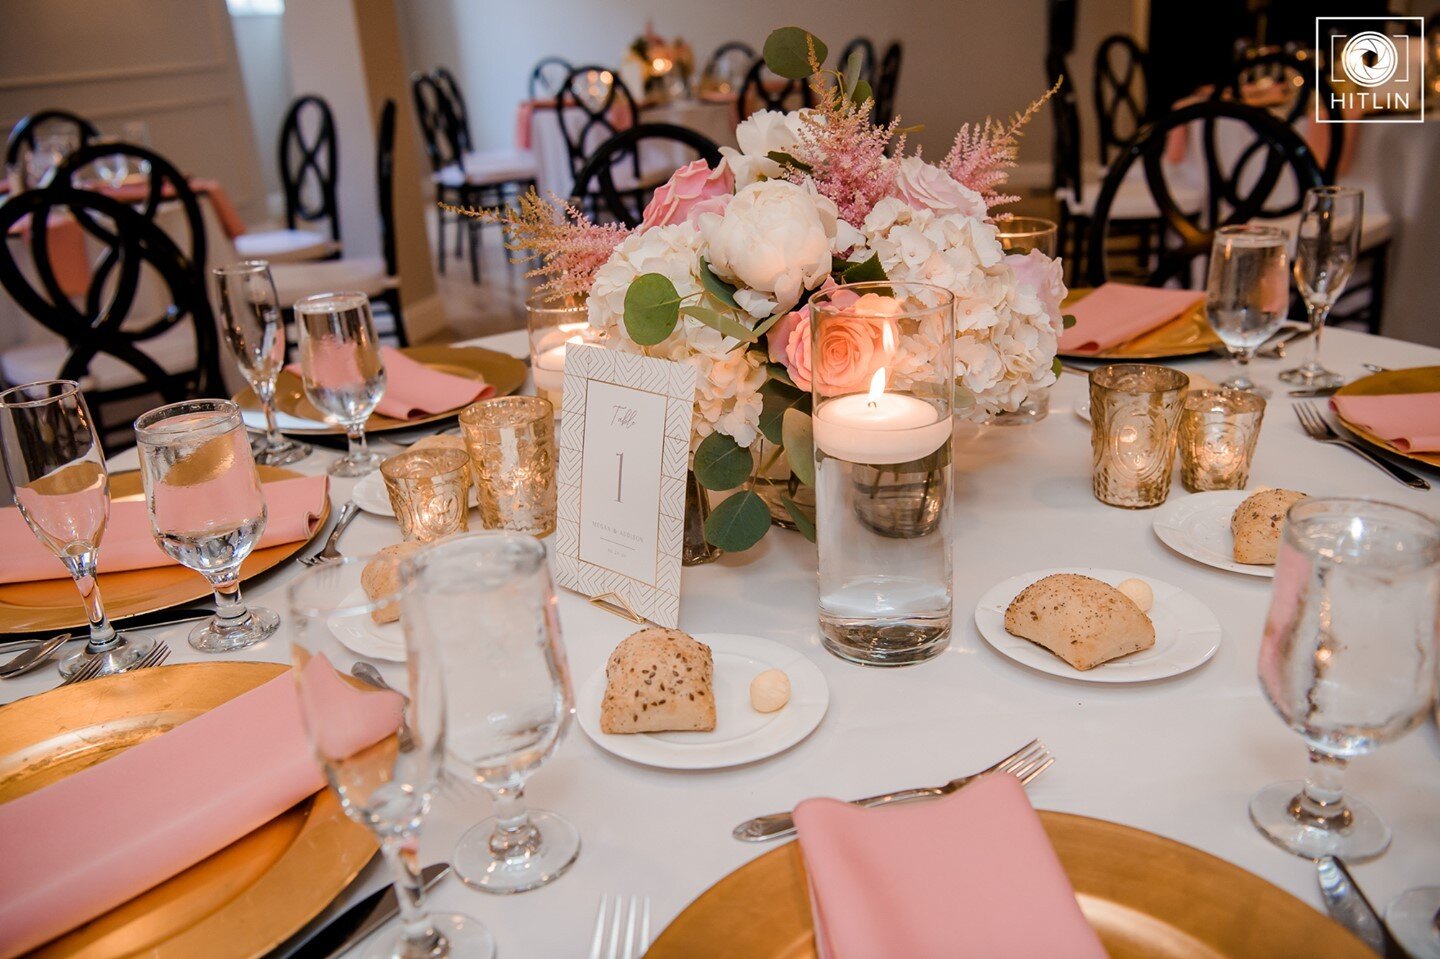 We love seeing all of the little details couples choose to make The Kenmore Ballroom fit their unique vision 😊

📸 @hitlinphoto
&bull;
&bull;
&bull;
&bull;
#weddingday #weddingplanner #kenmoreballroom #historicalbany #albanyny #lathamny #colonieny #